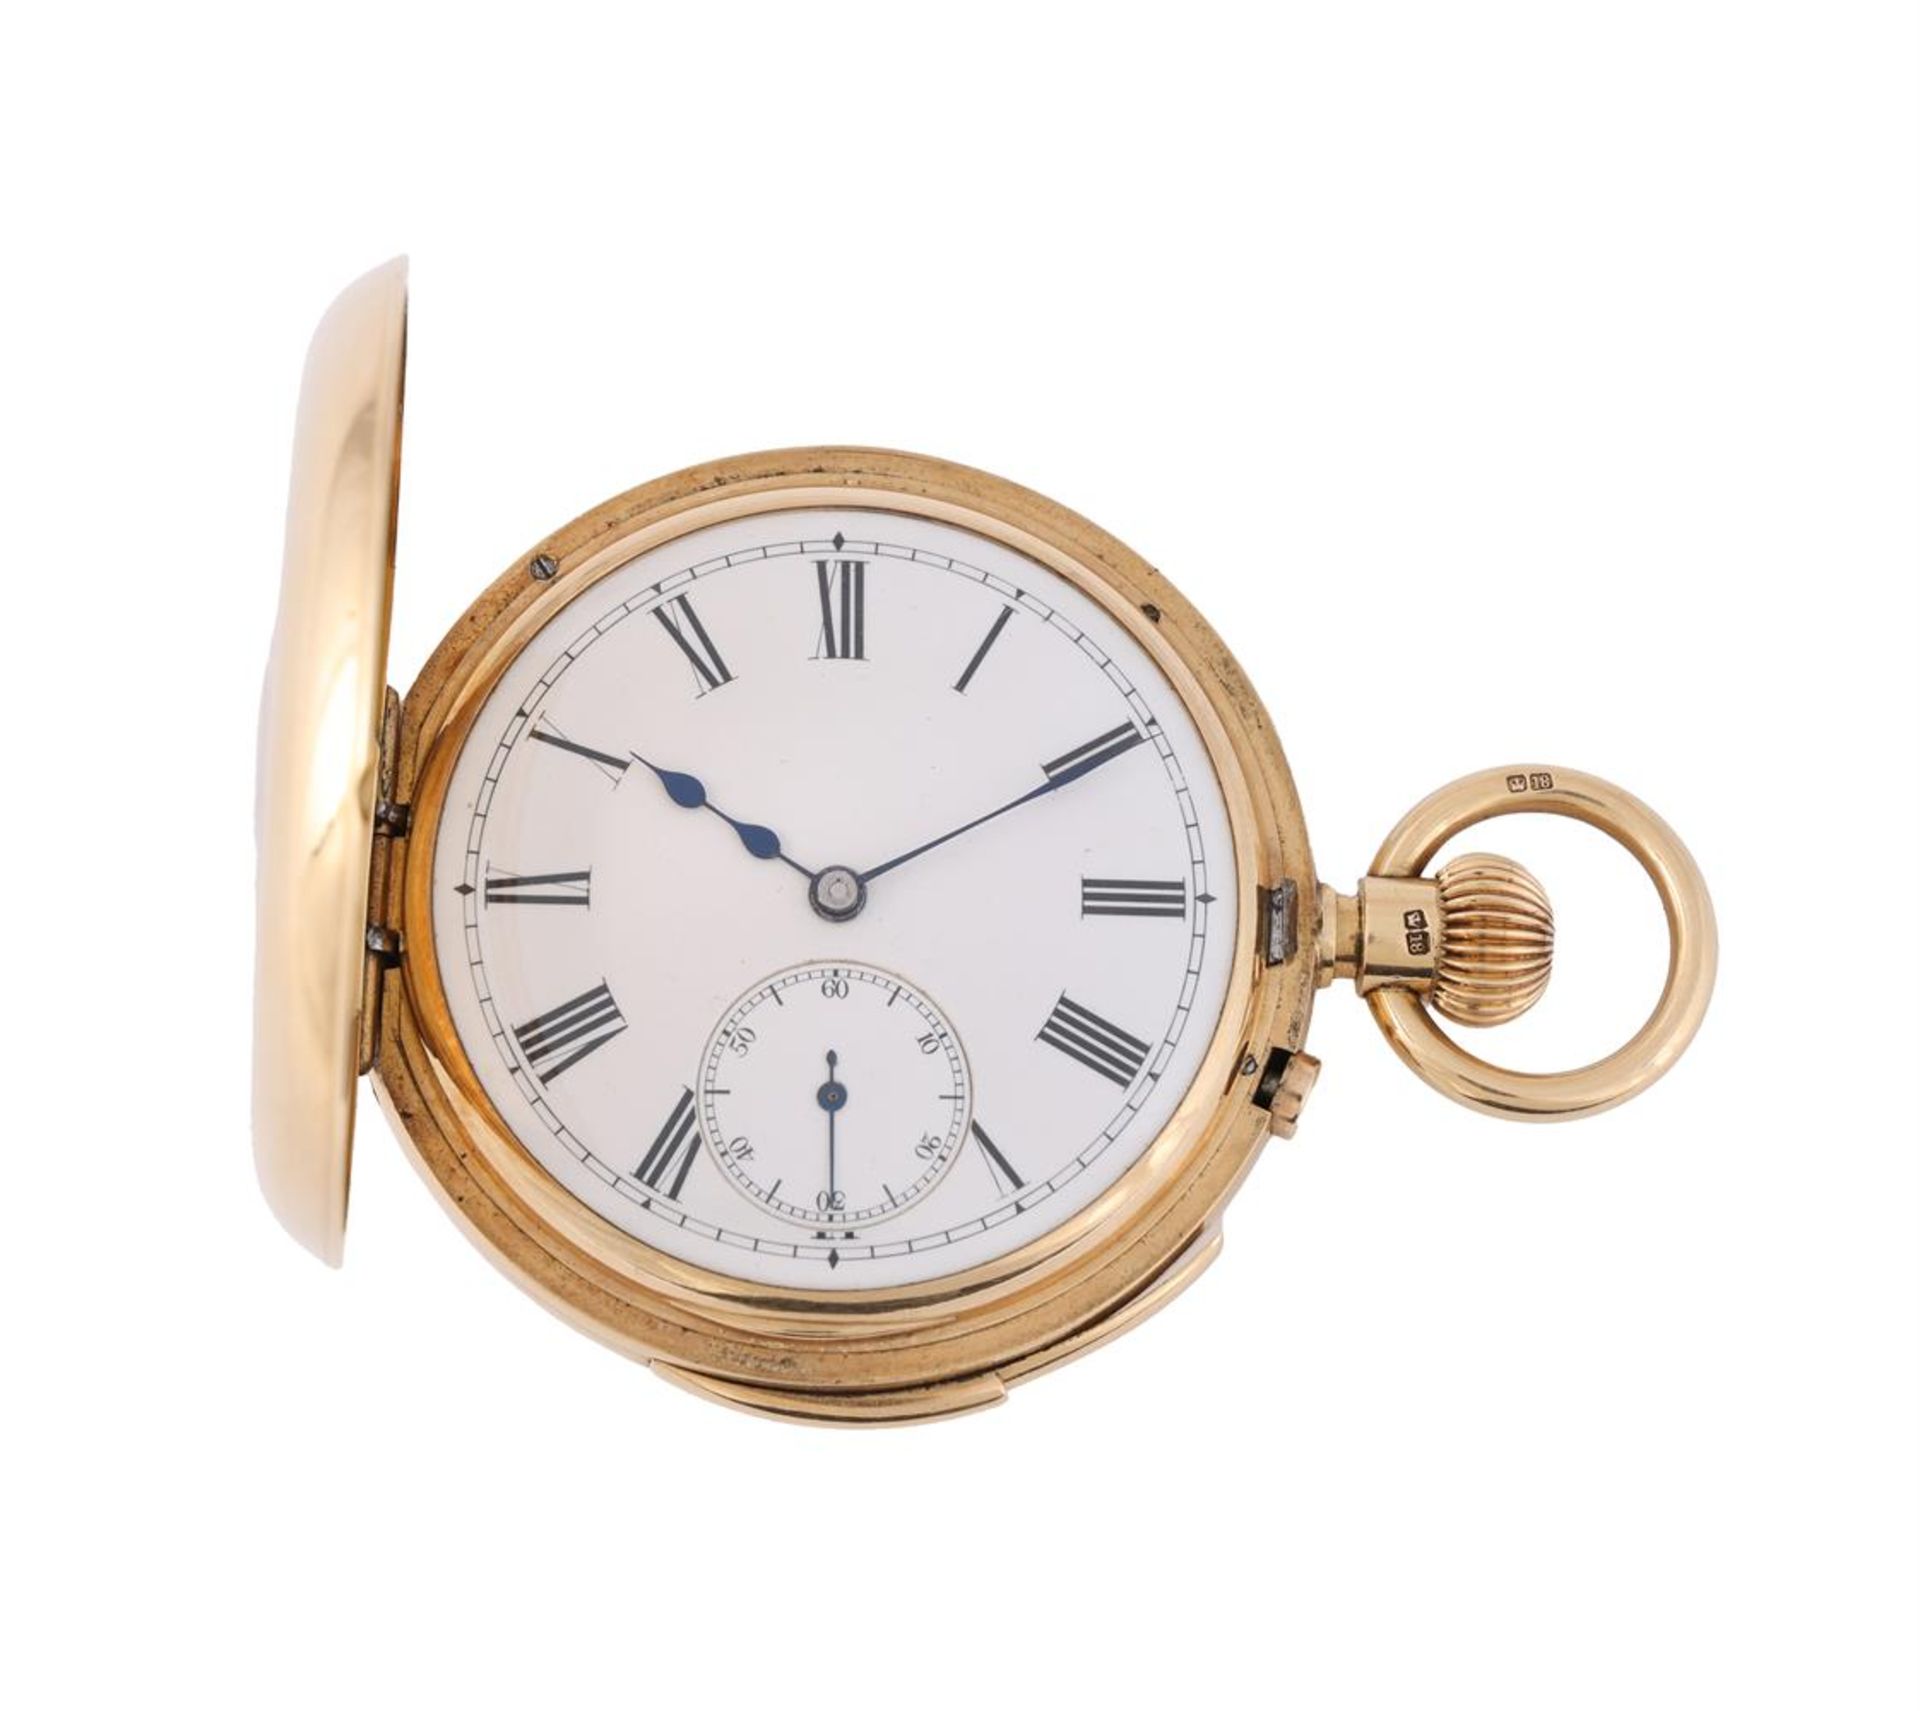 UNSIGNED, AN 18 CARAT GOLD KEYLESS WIND MINUTE REPEATER HALF HUNTER POCKET WATCH - Image 2 of 4